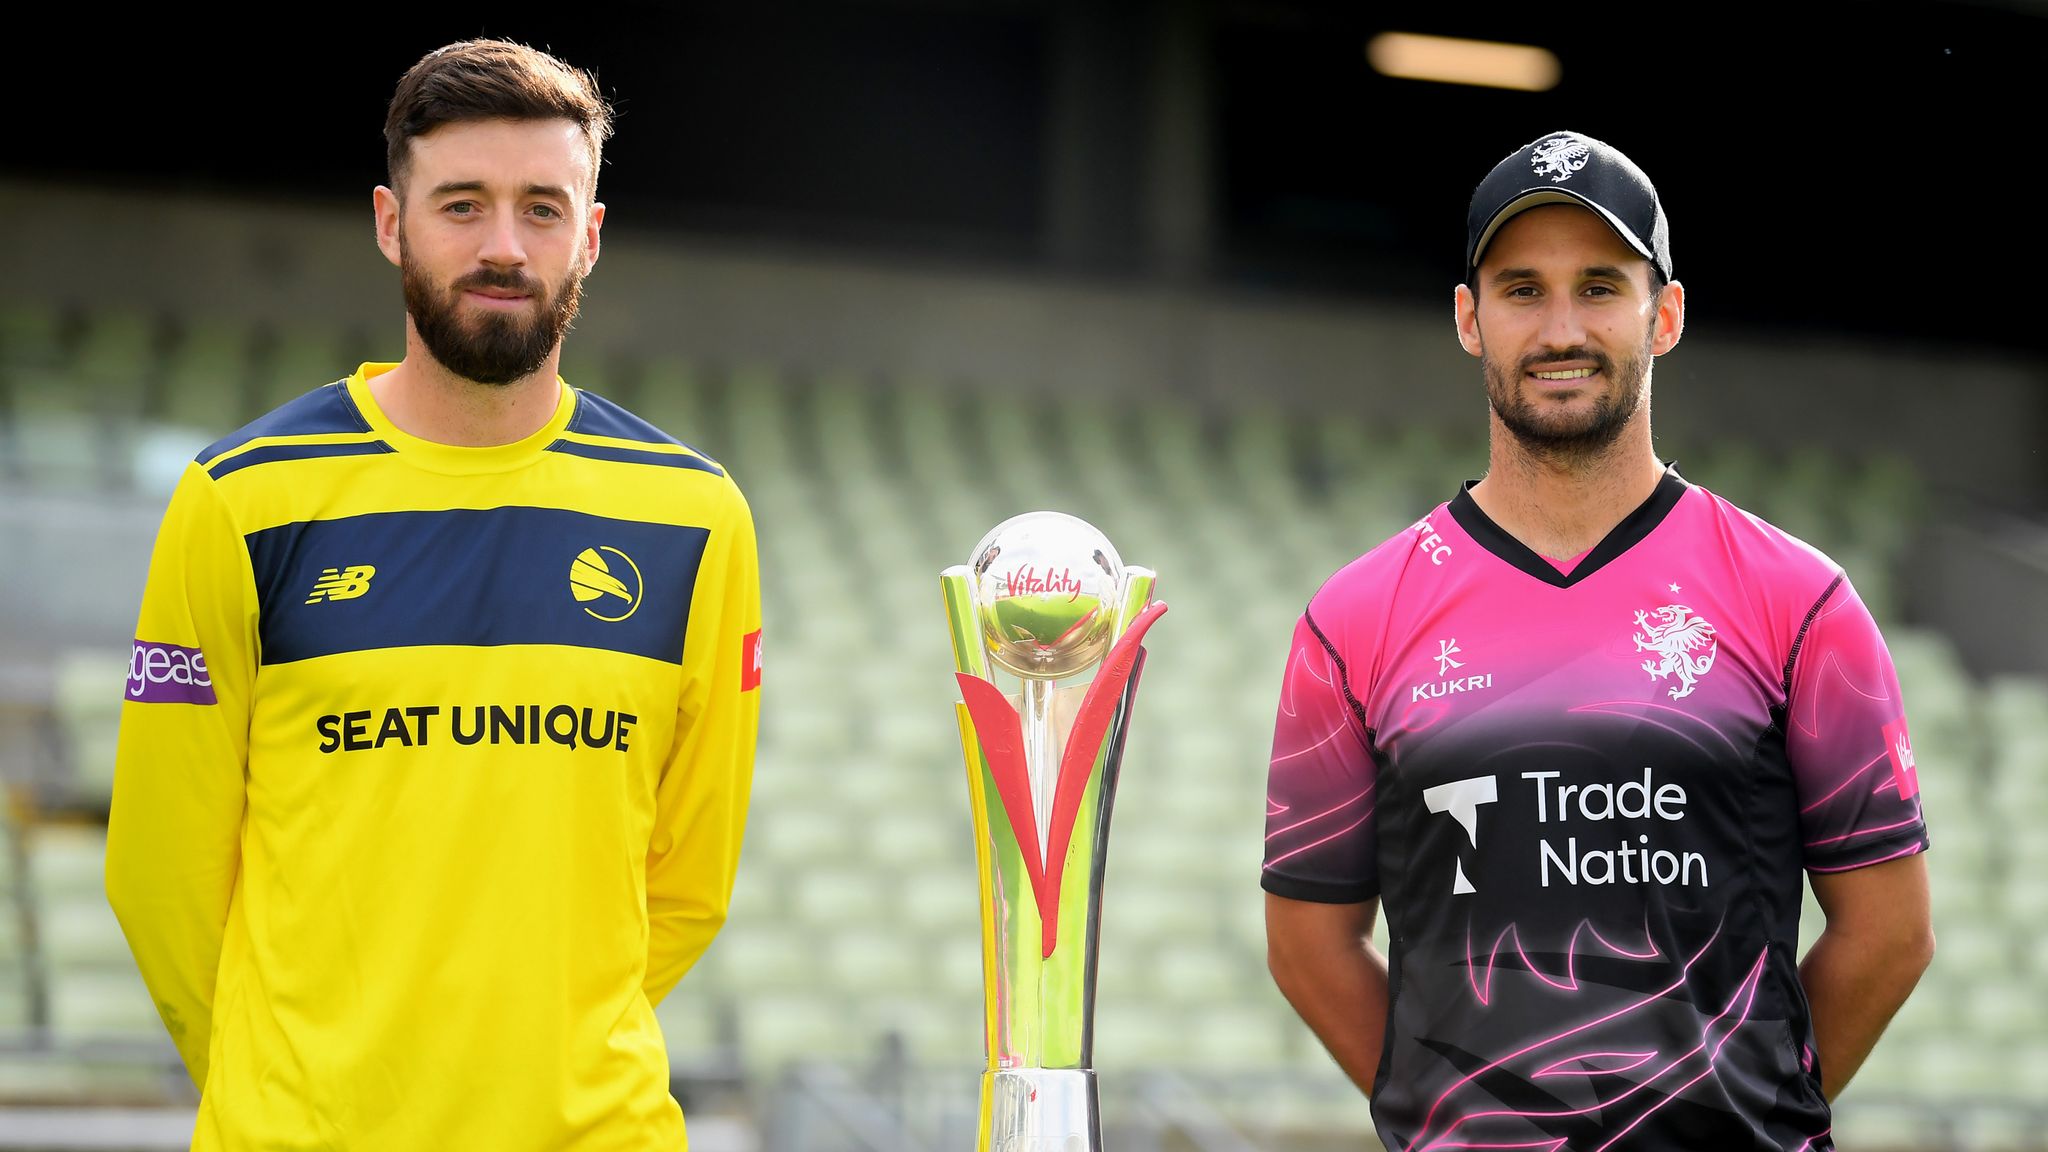 Vitality Blast Finals Day James Vince, Lewis Gregory, Sam Billings, Luke Wright vie to lift T20 trophy Cricket News Sky Sports